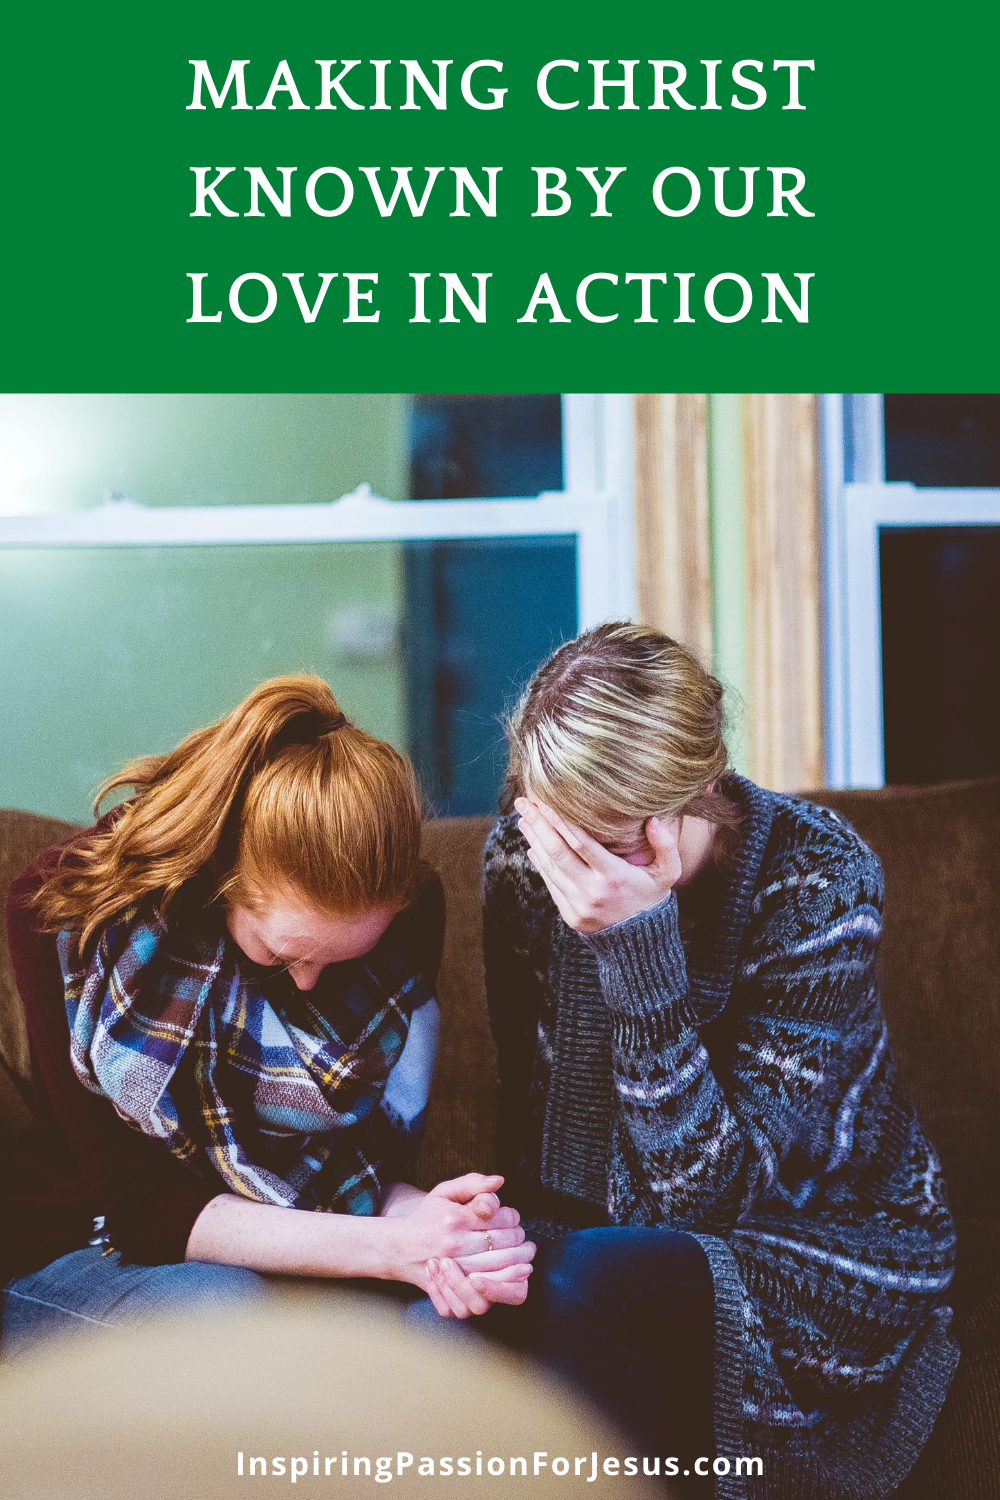 Making Christ Known by Our Love in Action